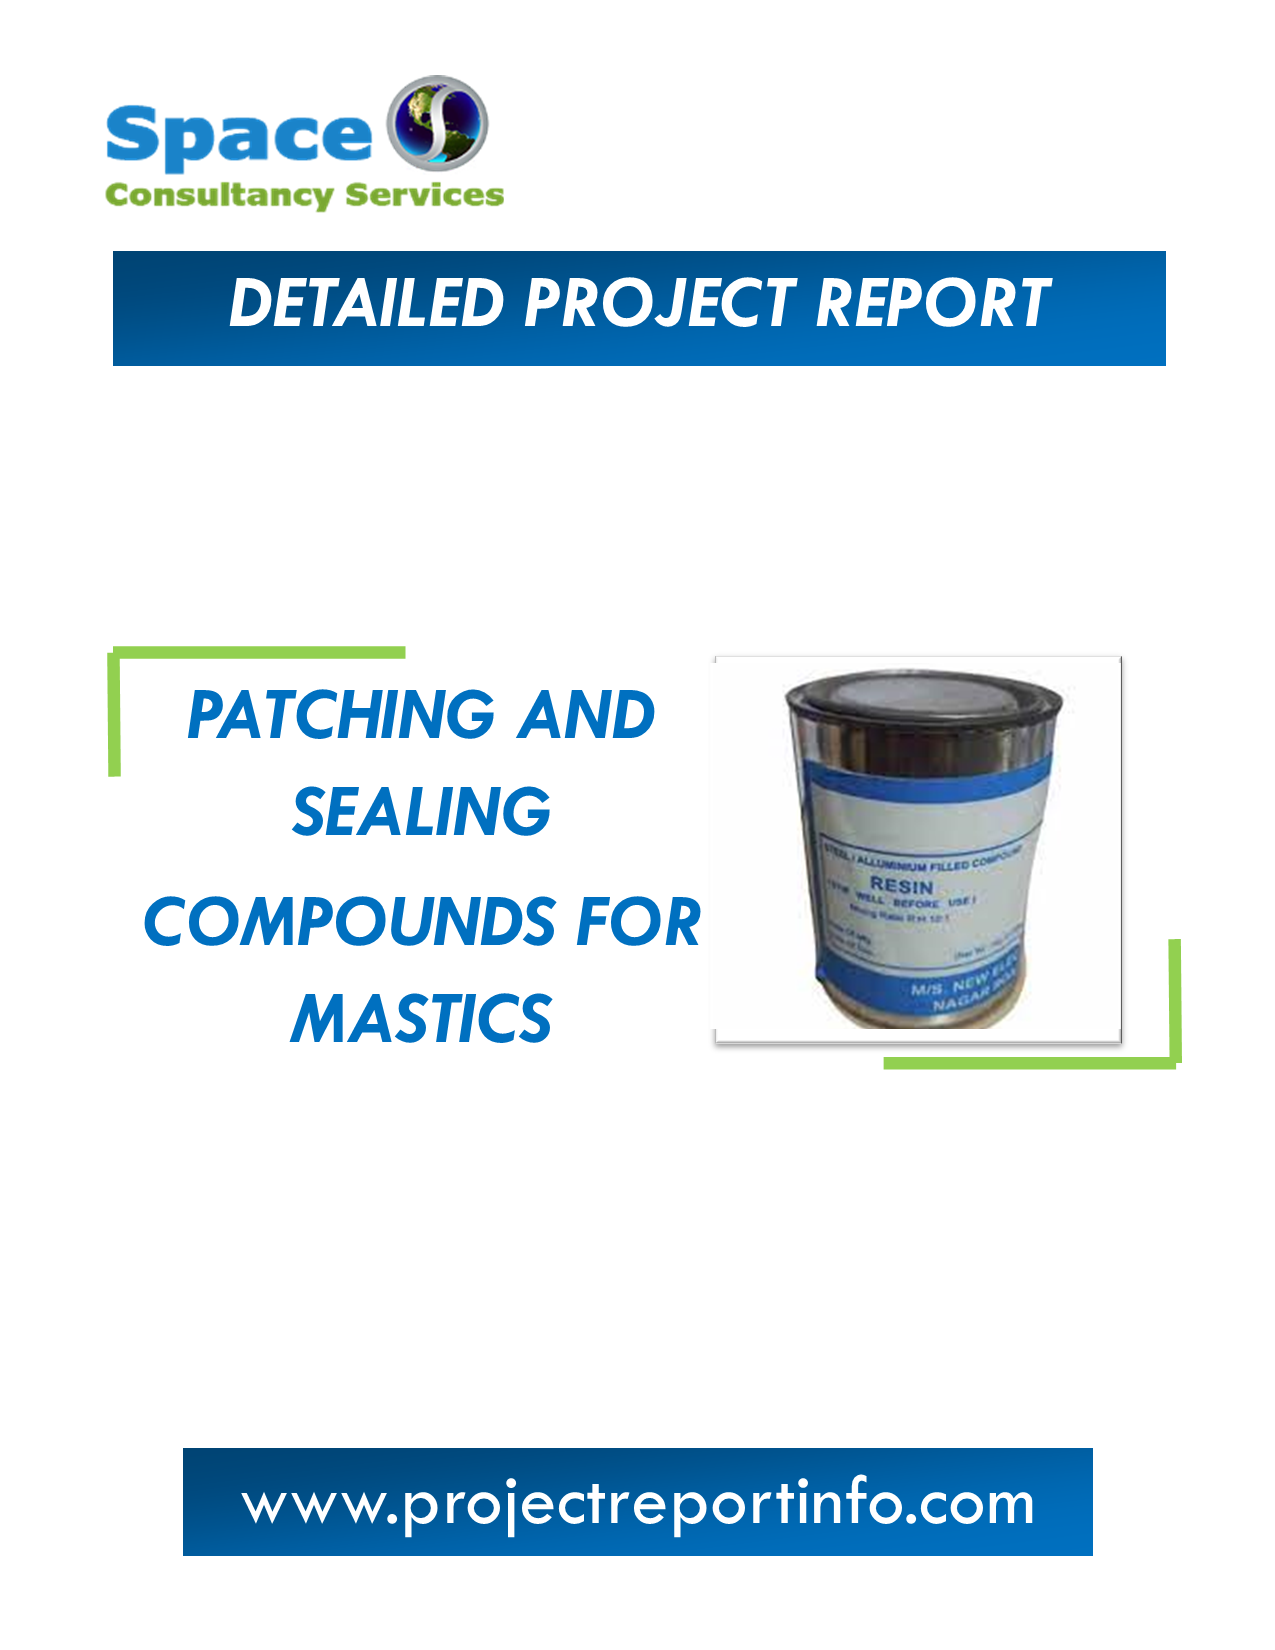 Project Report on Patching and Sealing Compounds for Mastics